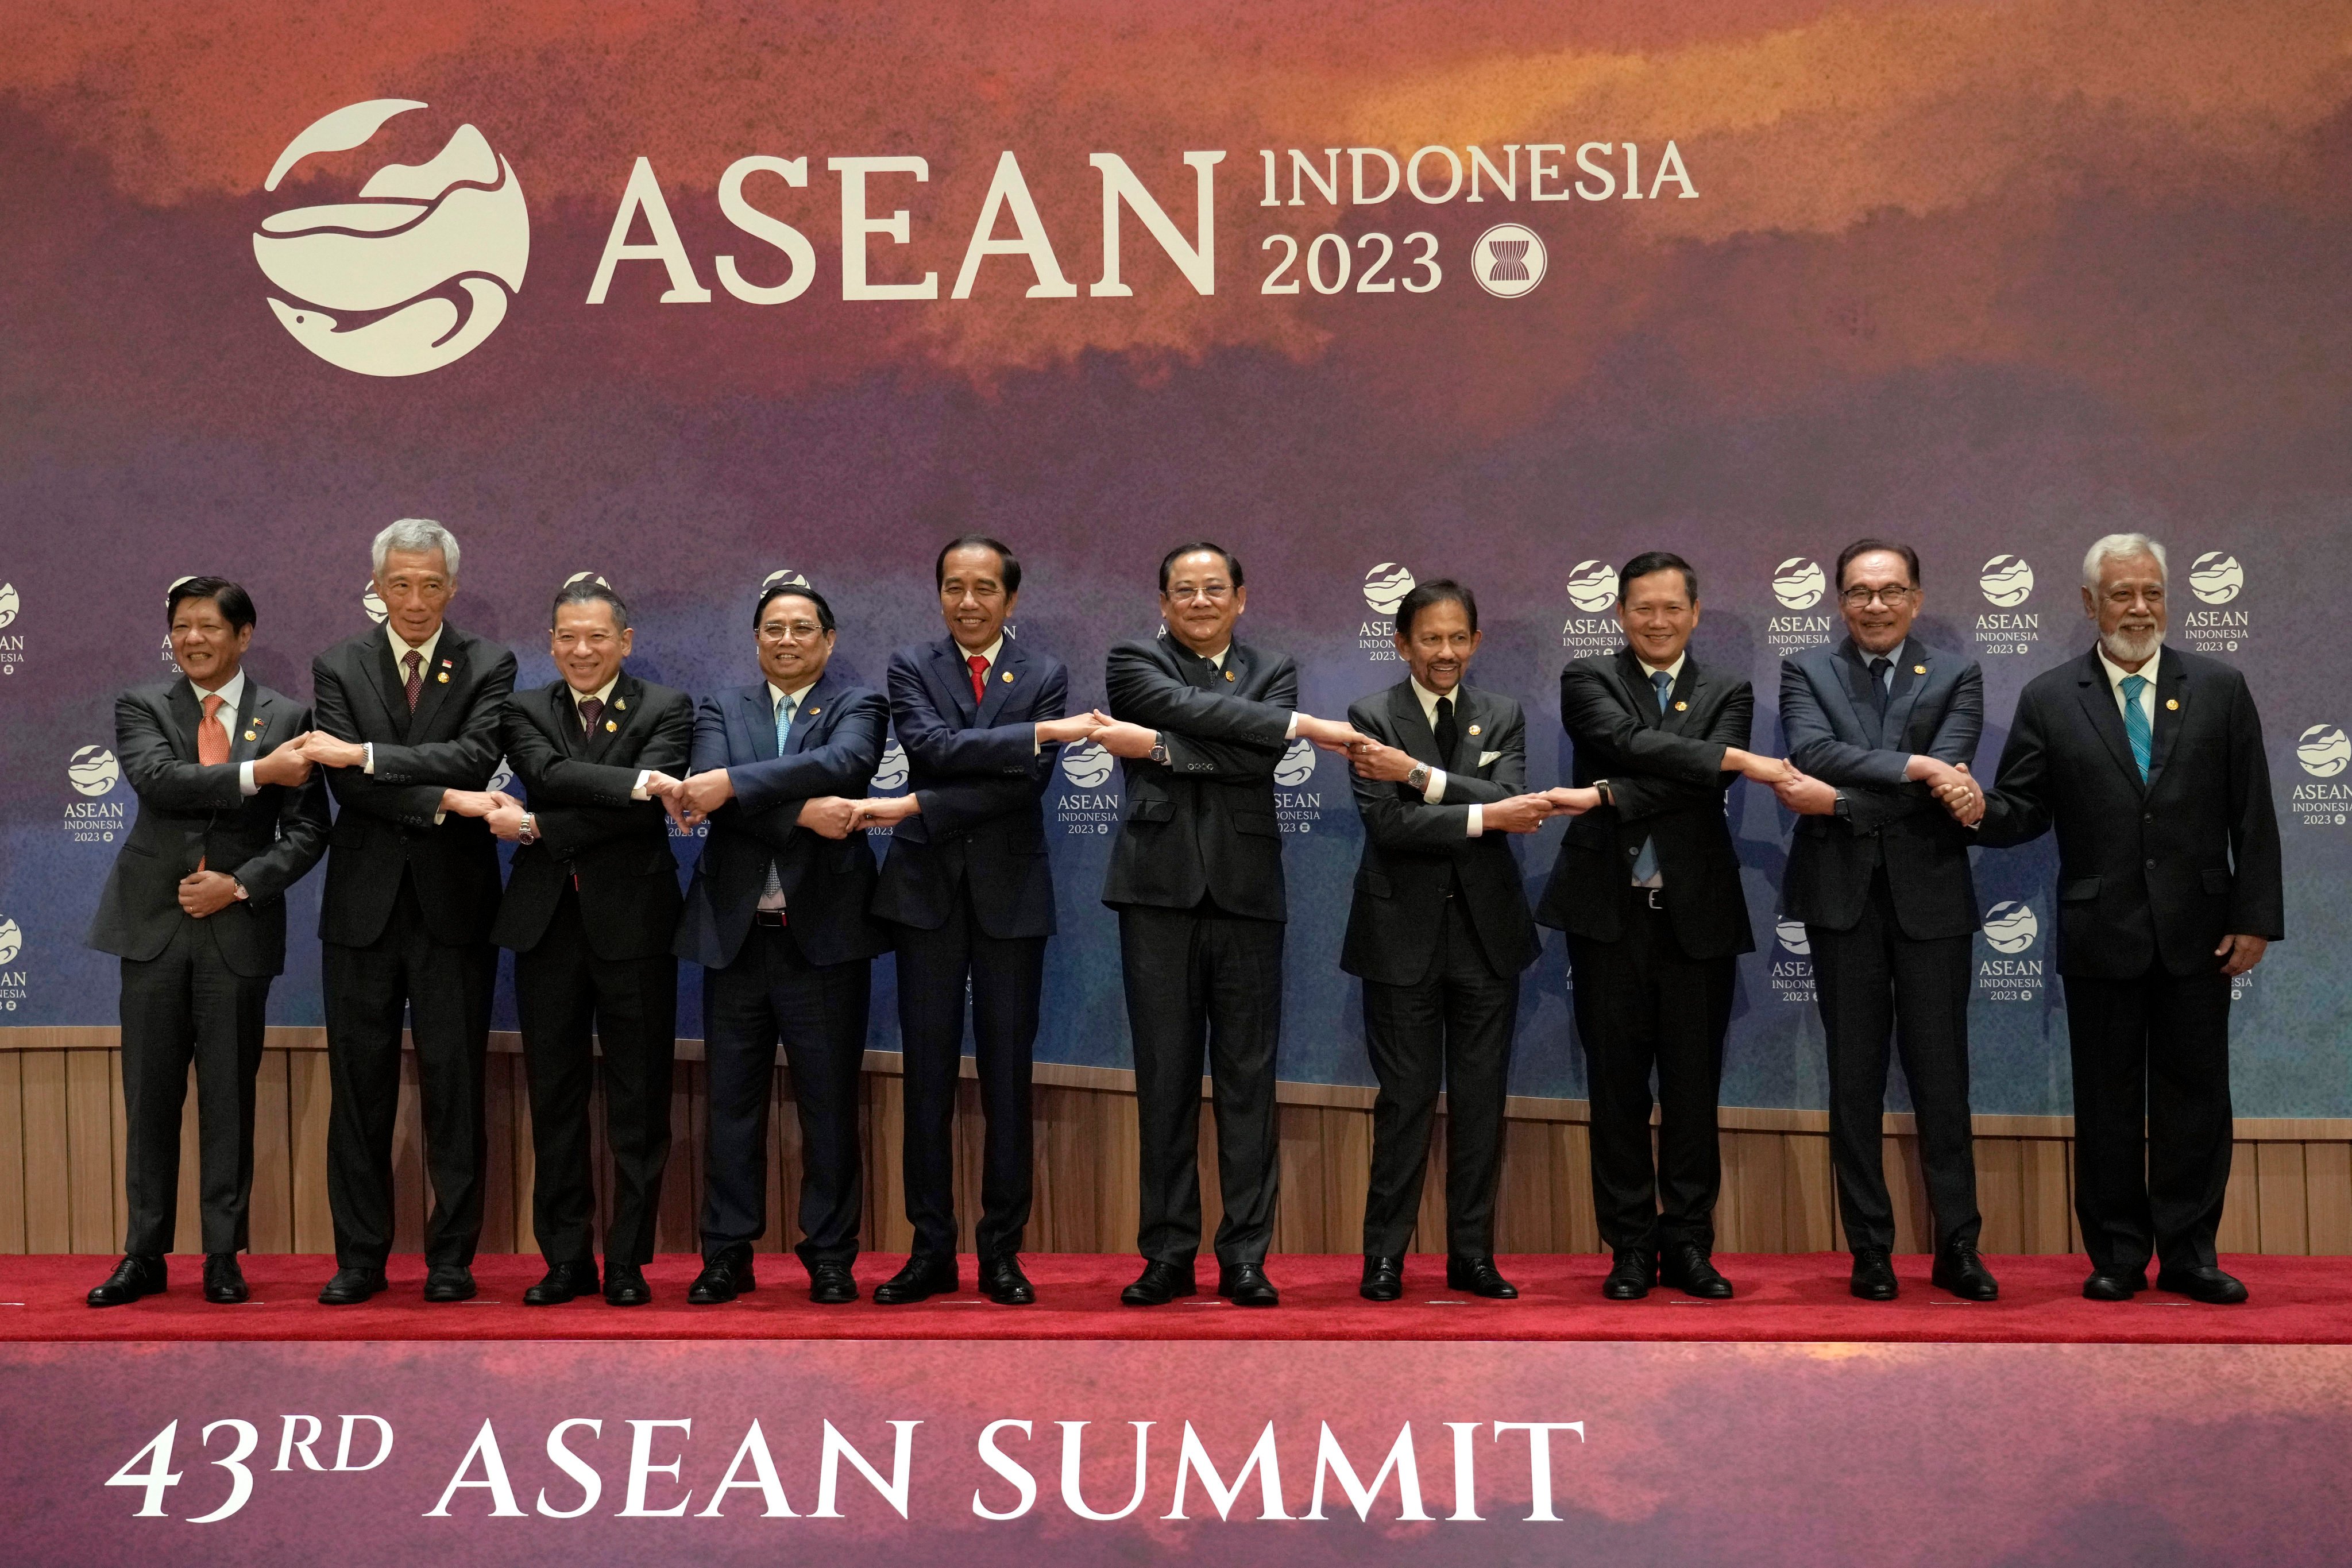 Asean leaders pose for a group photo at their 2023 summit in Jakarta. Photo: AP